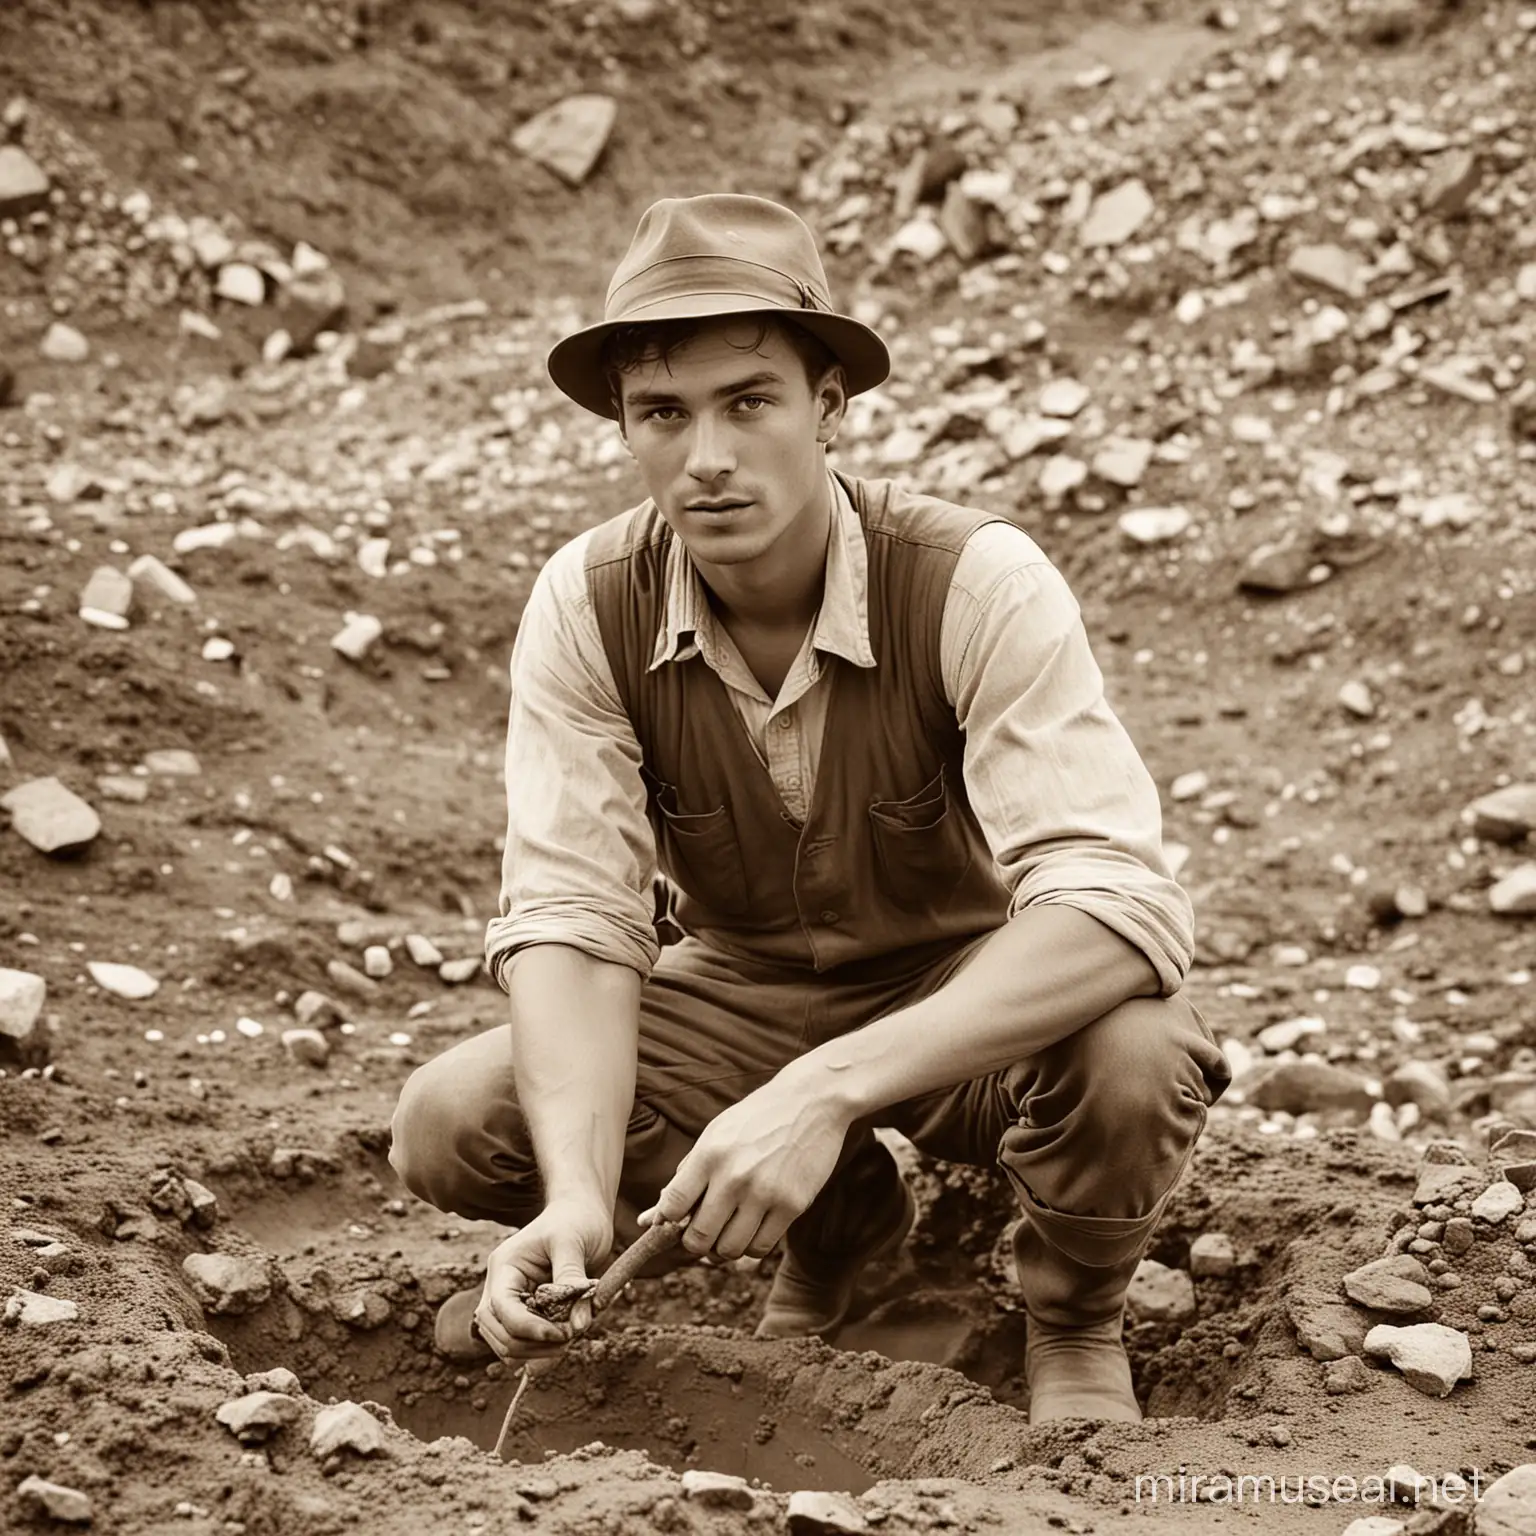 Young Man Archaeologist Excavating in 1920s Europe with Brown Hair and Hat